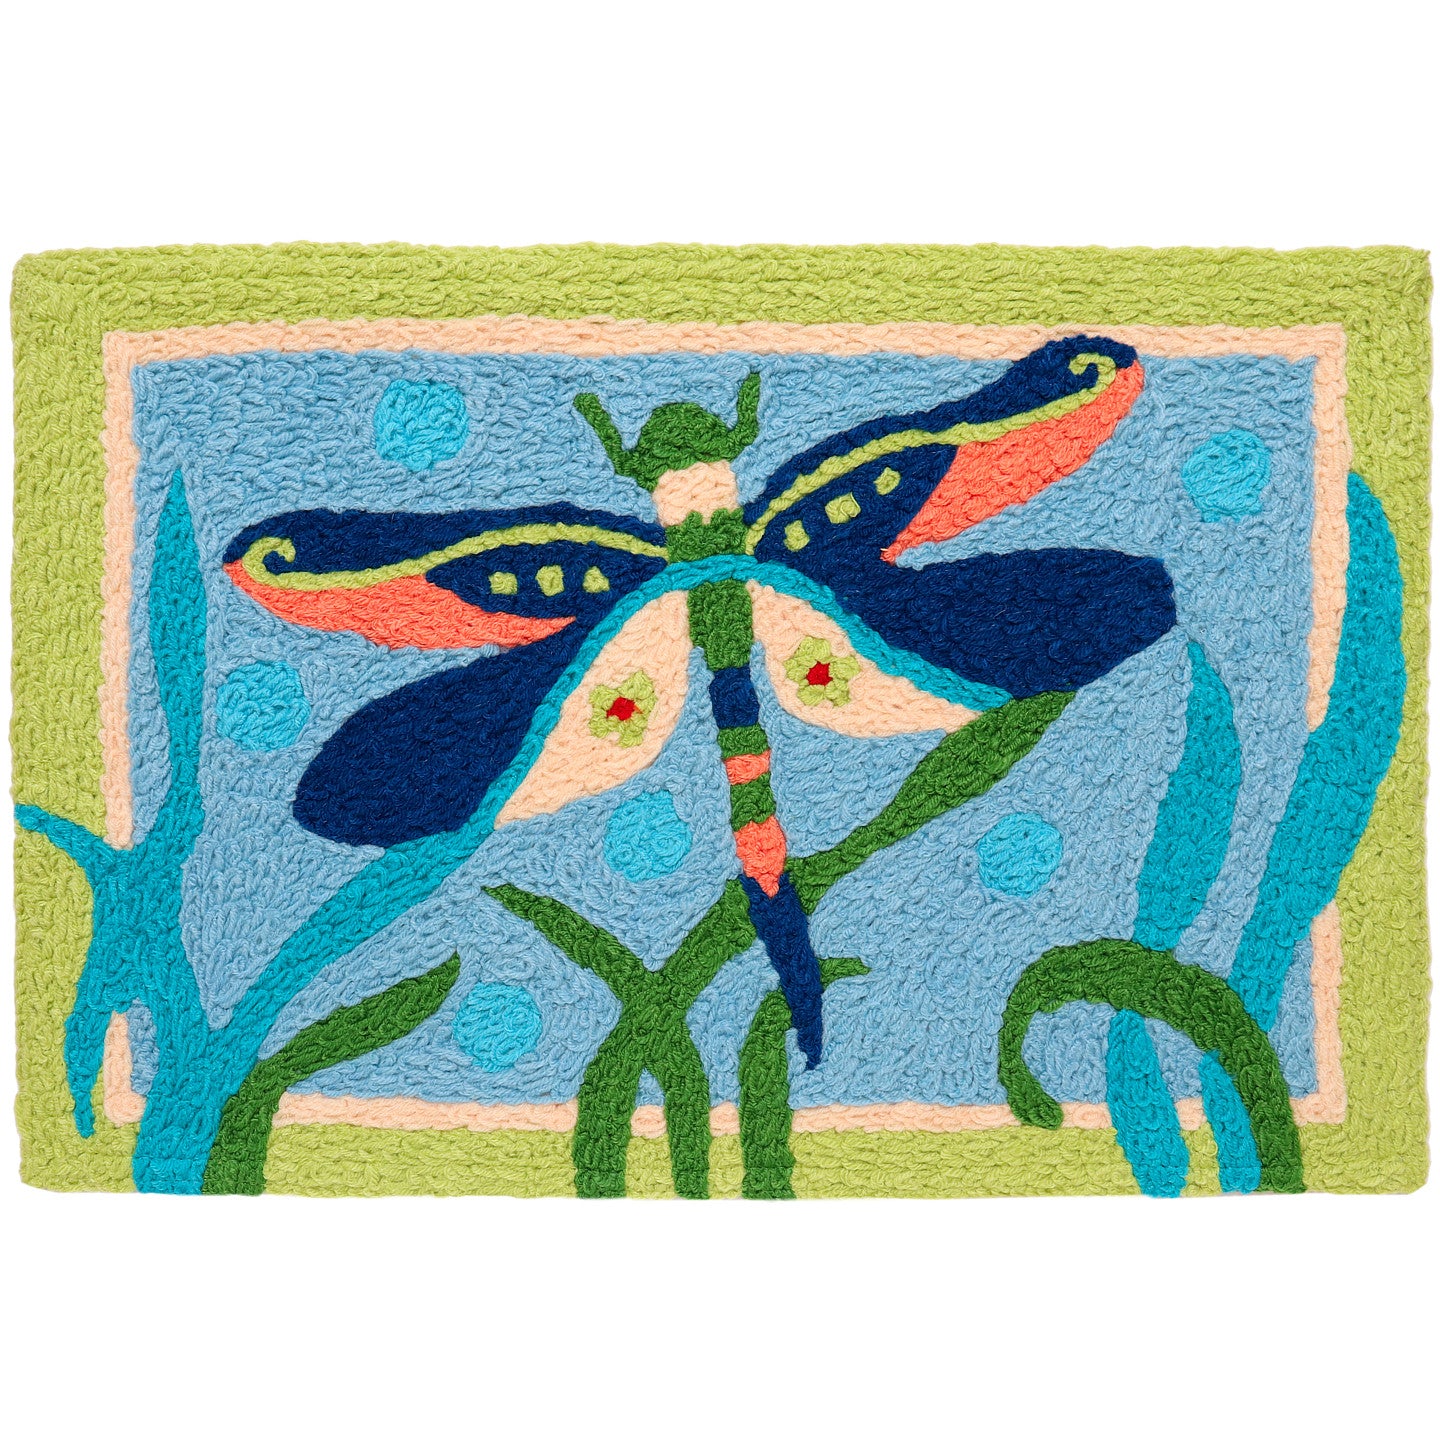 Fancy Dressed Dragonfly Jellybean Accent Rug 20"x30" Doormat